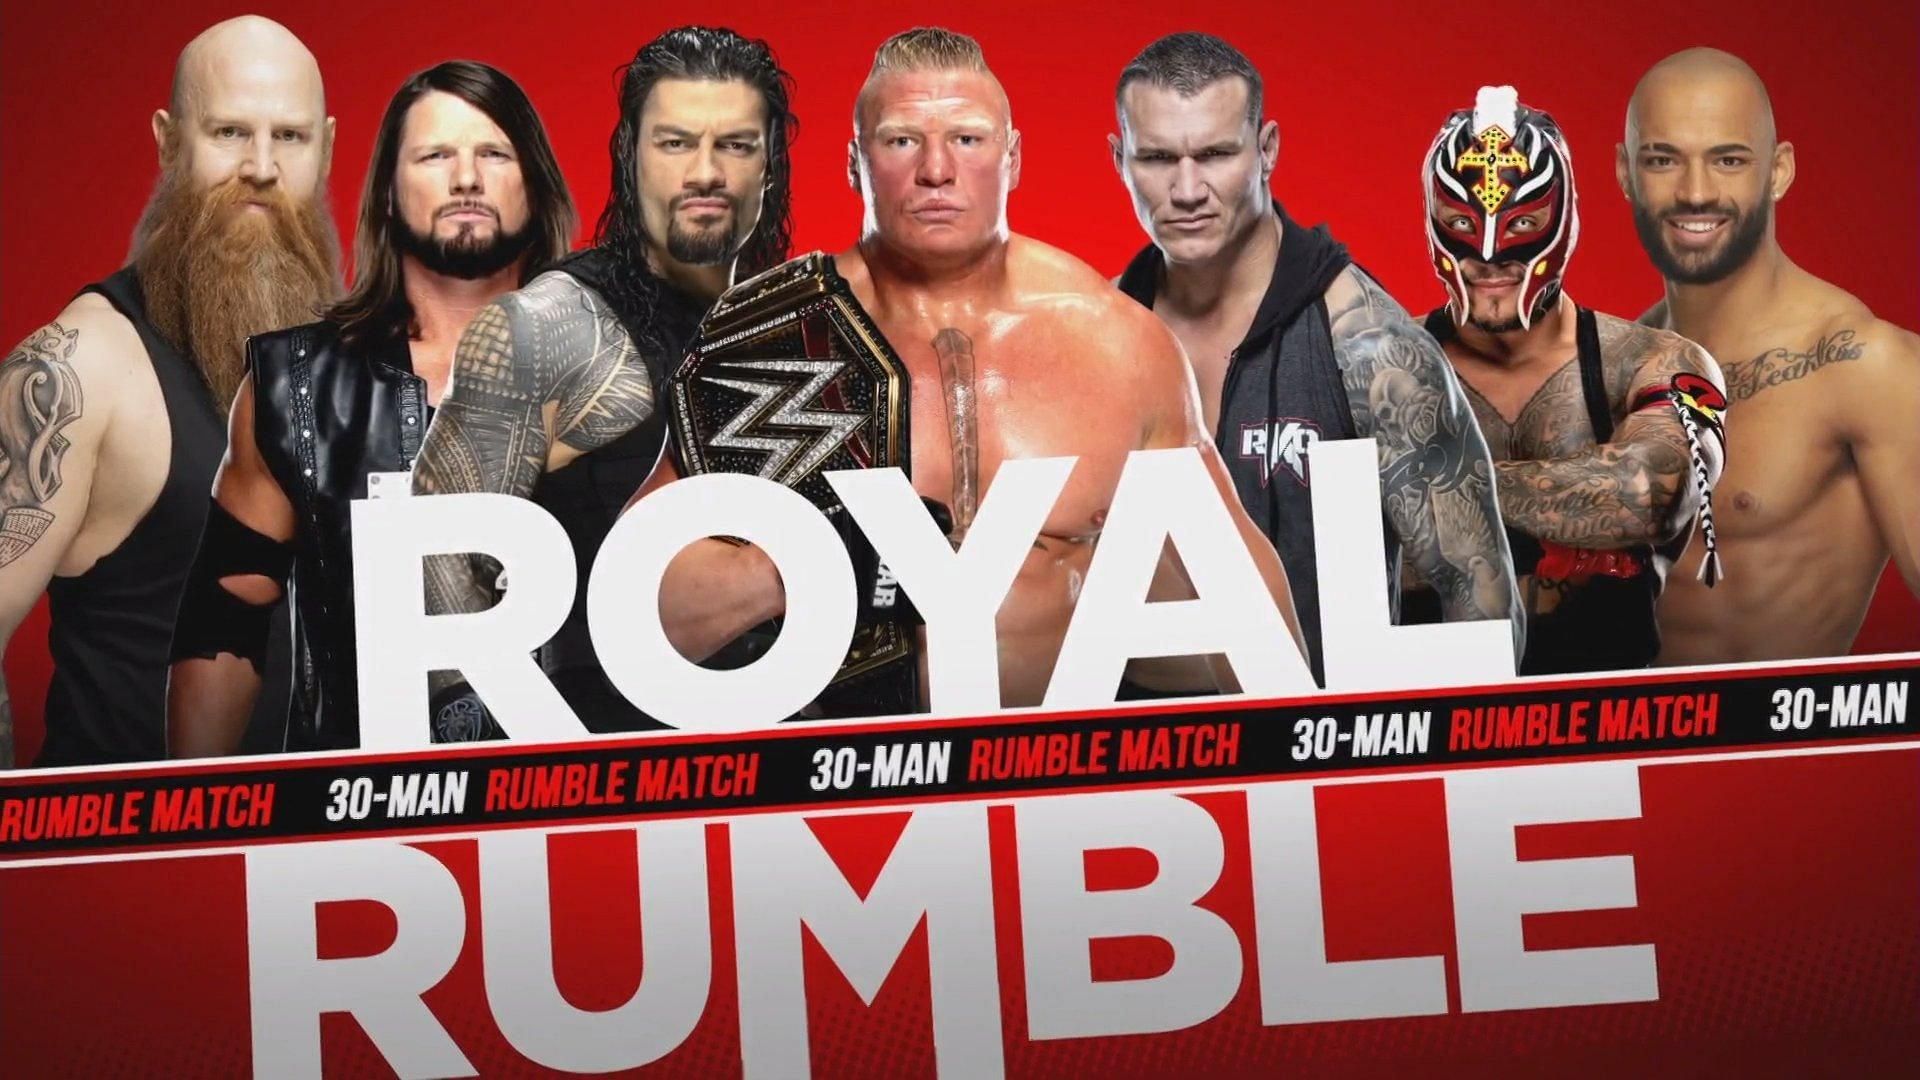 2020 Royal Rumble was the 33rd annual event of WWE